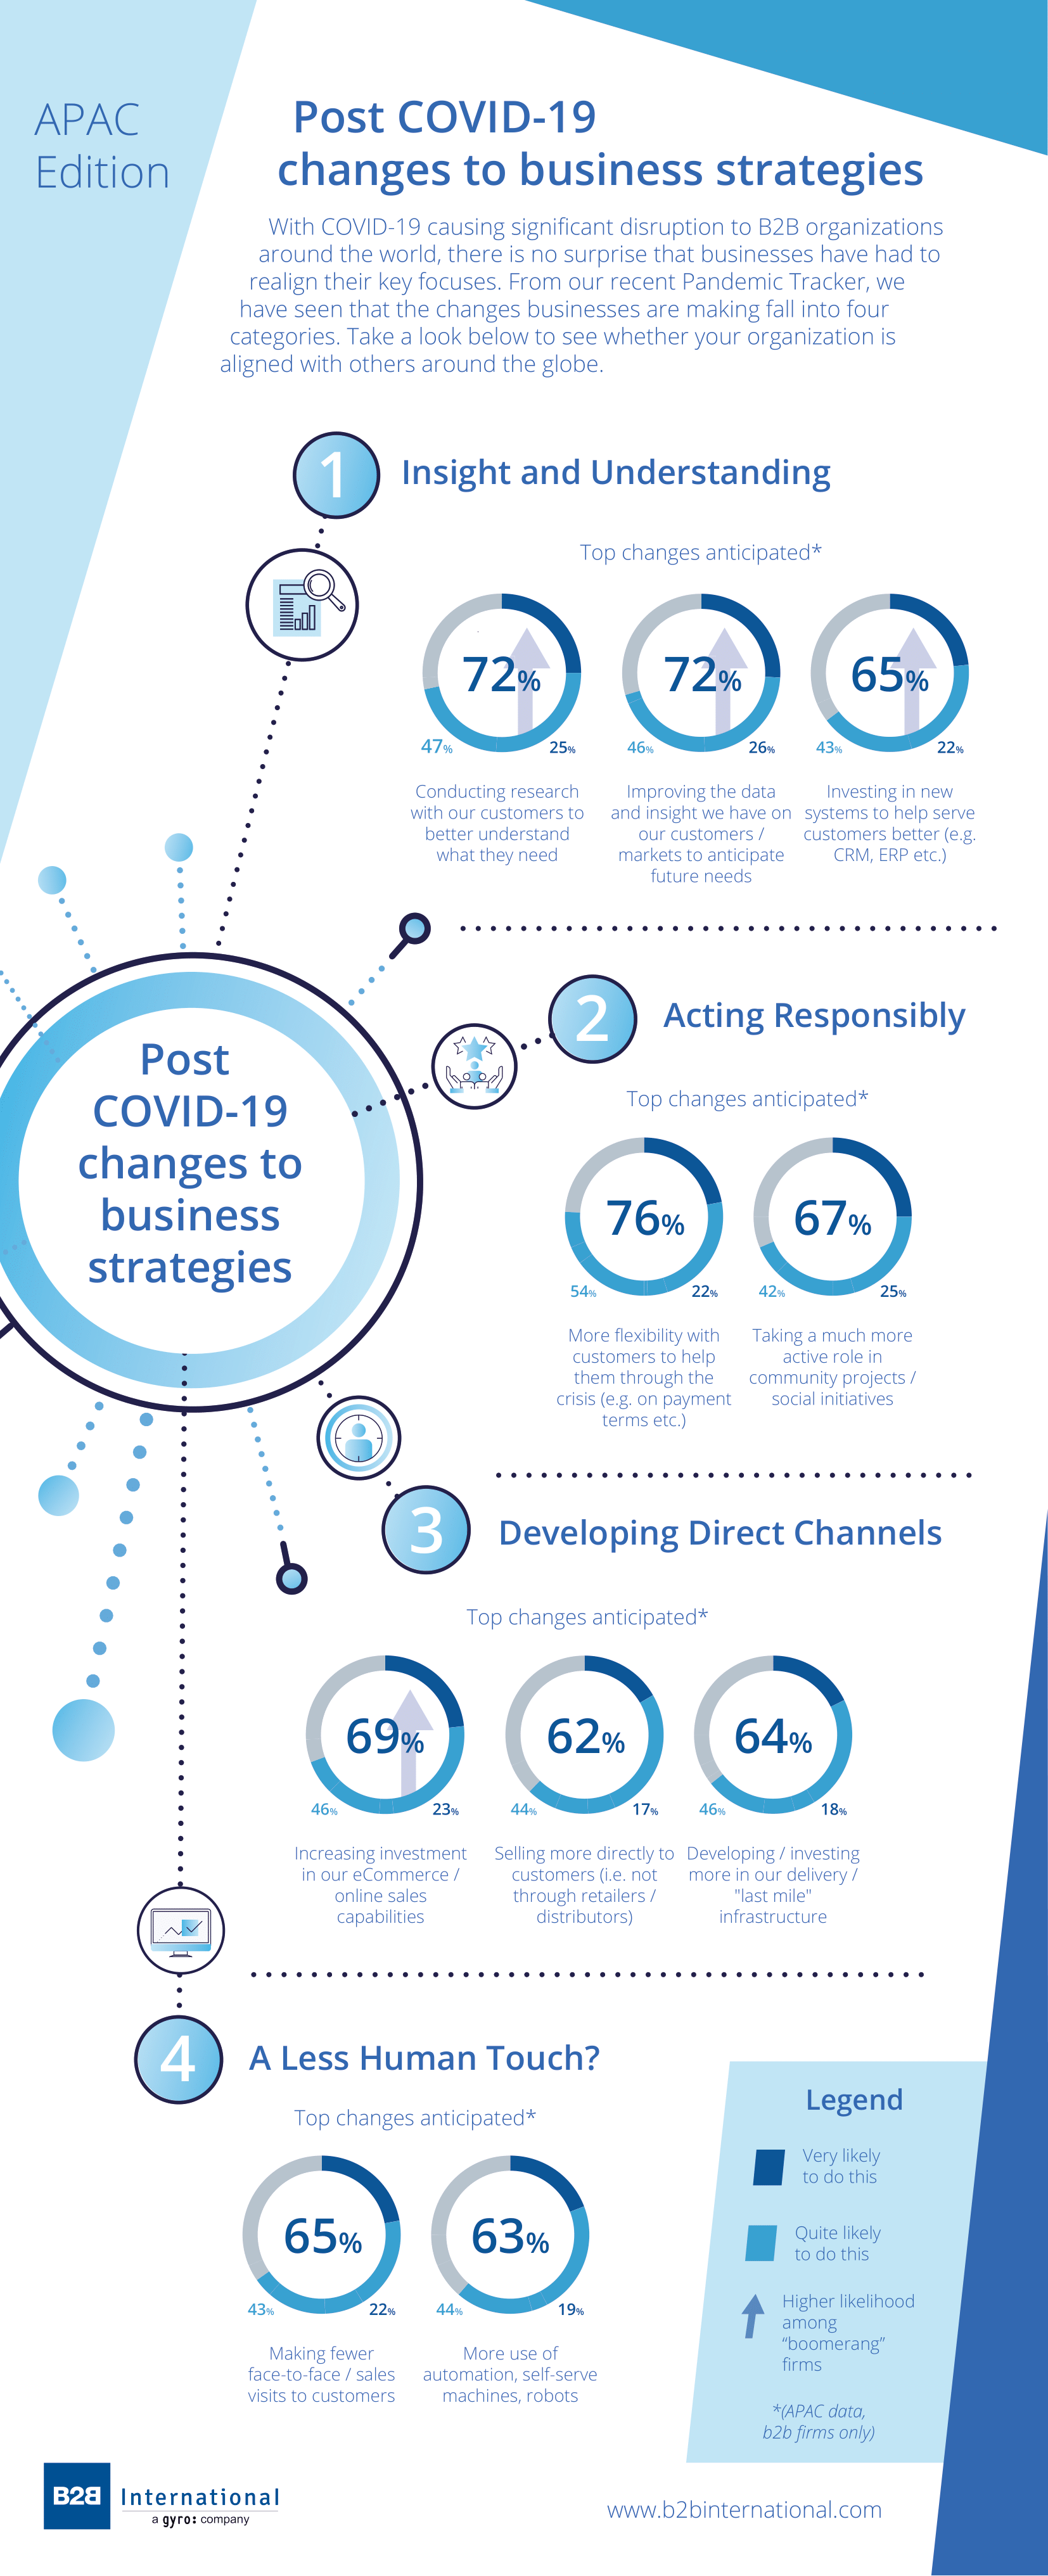 How Business Strategies Across Asia-Pacific Will Change Post COVID-19